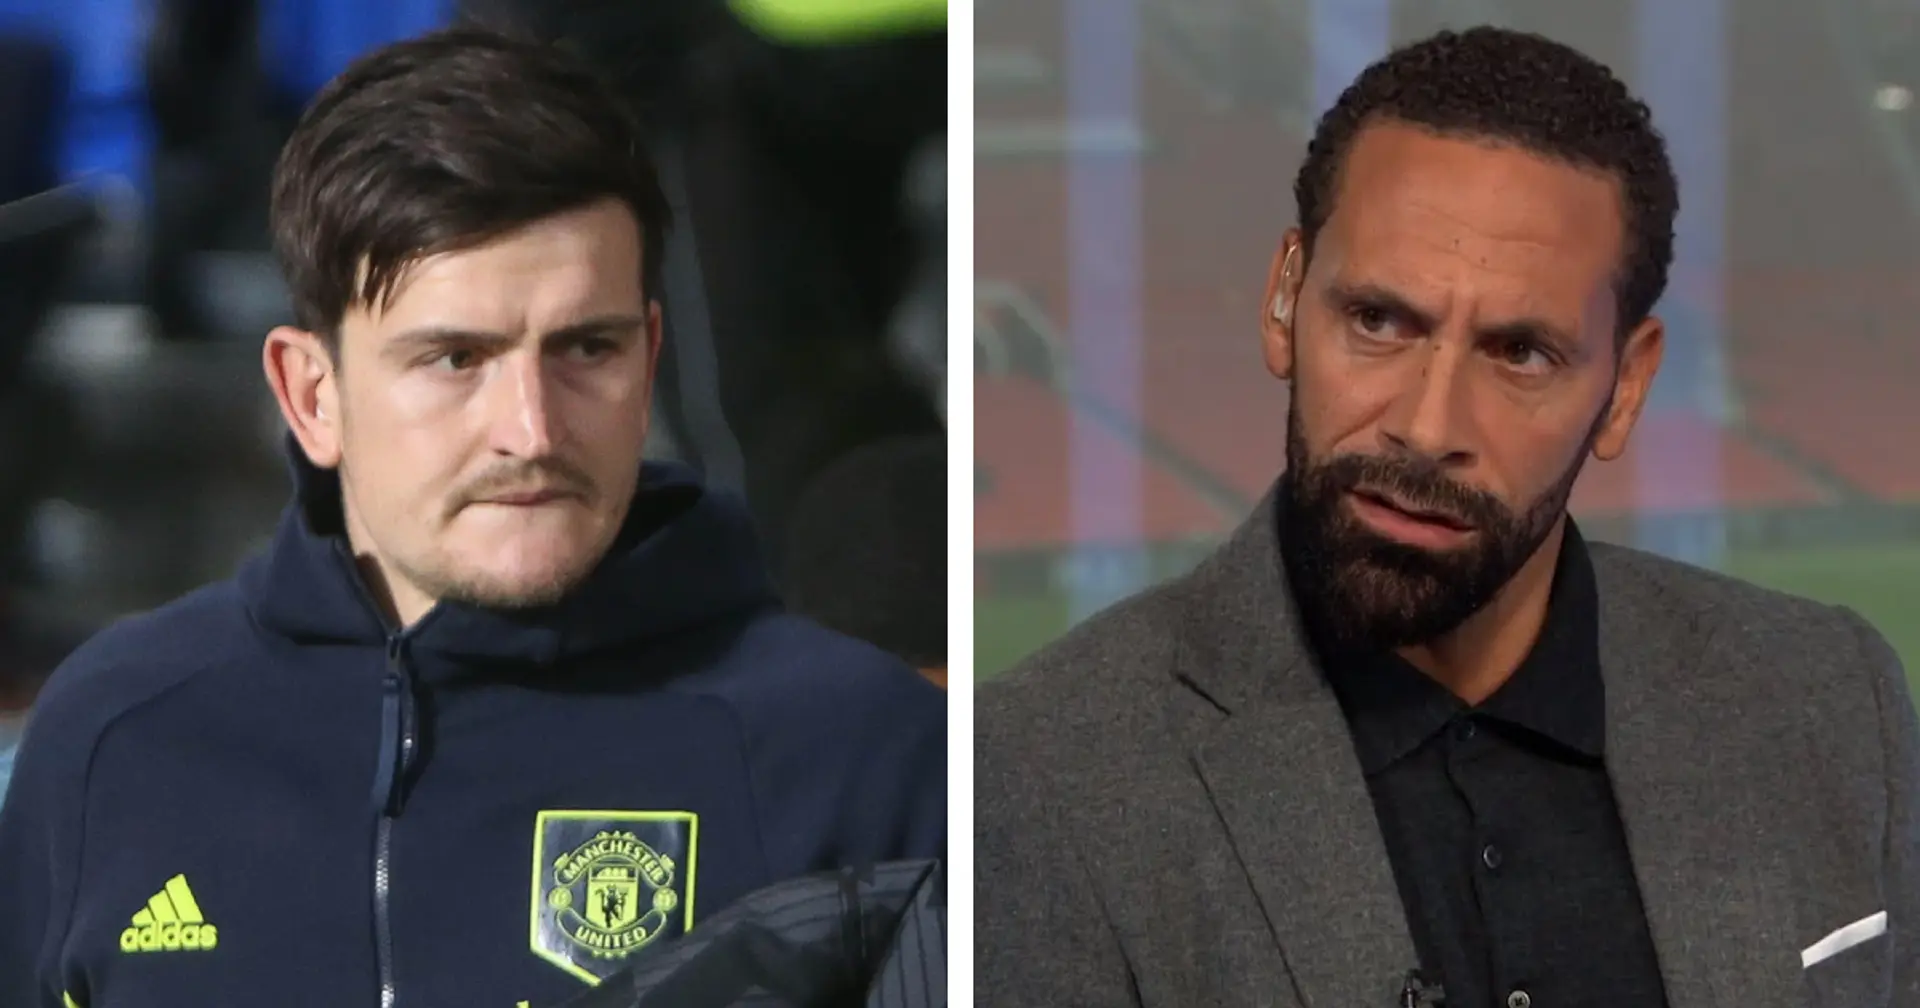 'I’d be absolutely gobsmacked': Ferdinand believes Maguire already looking for new club